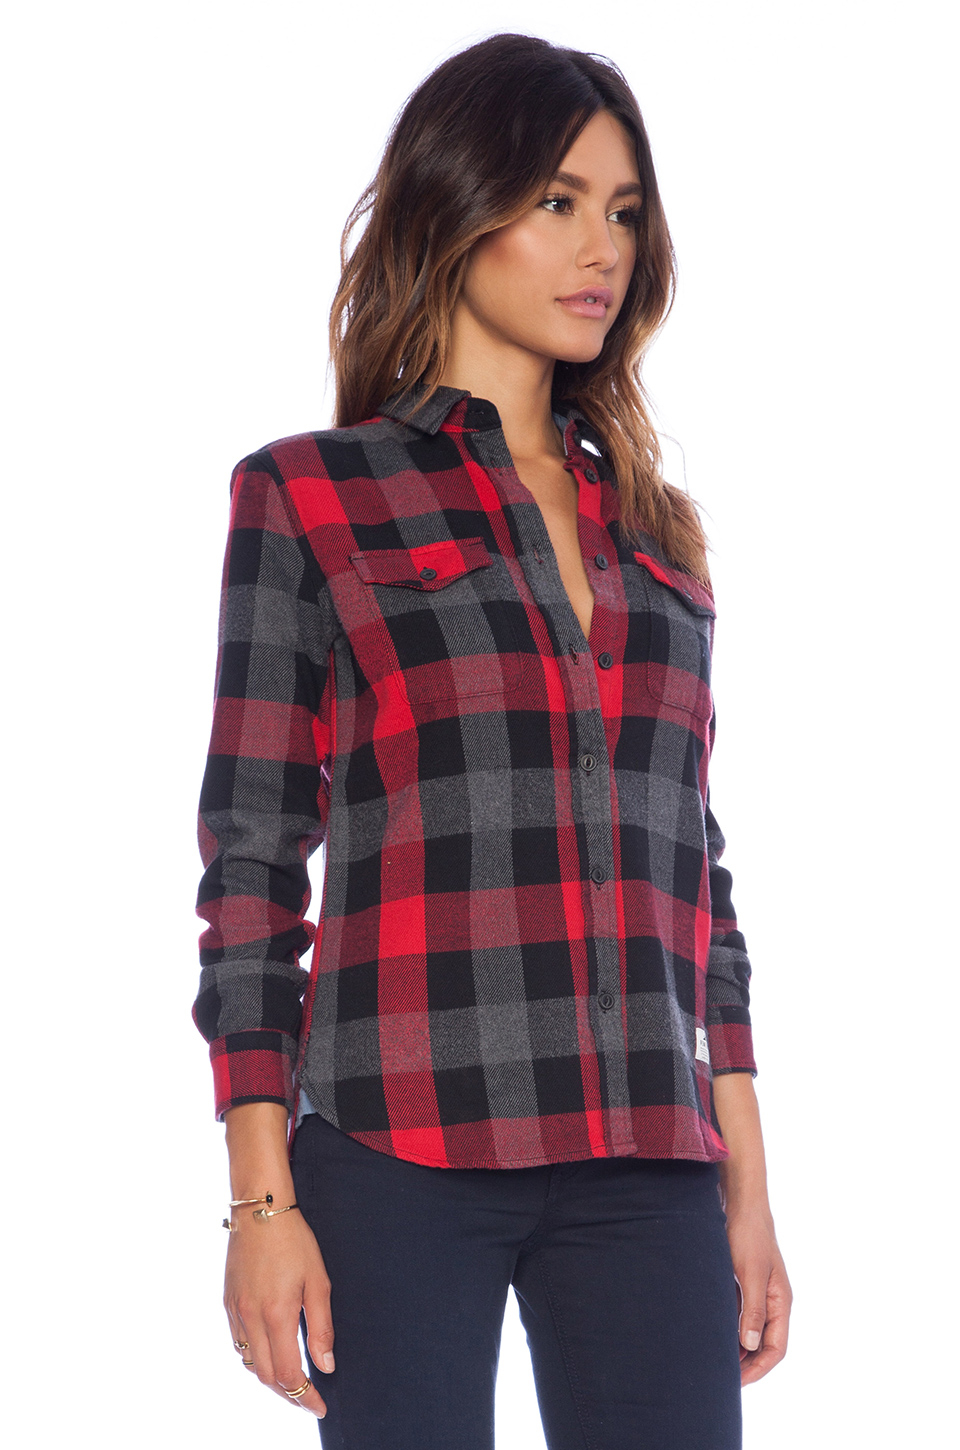 Lyst - Penfield Chatham Buffalo Plaid Shirt in Red